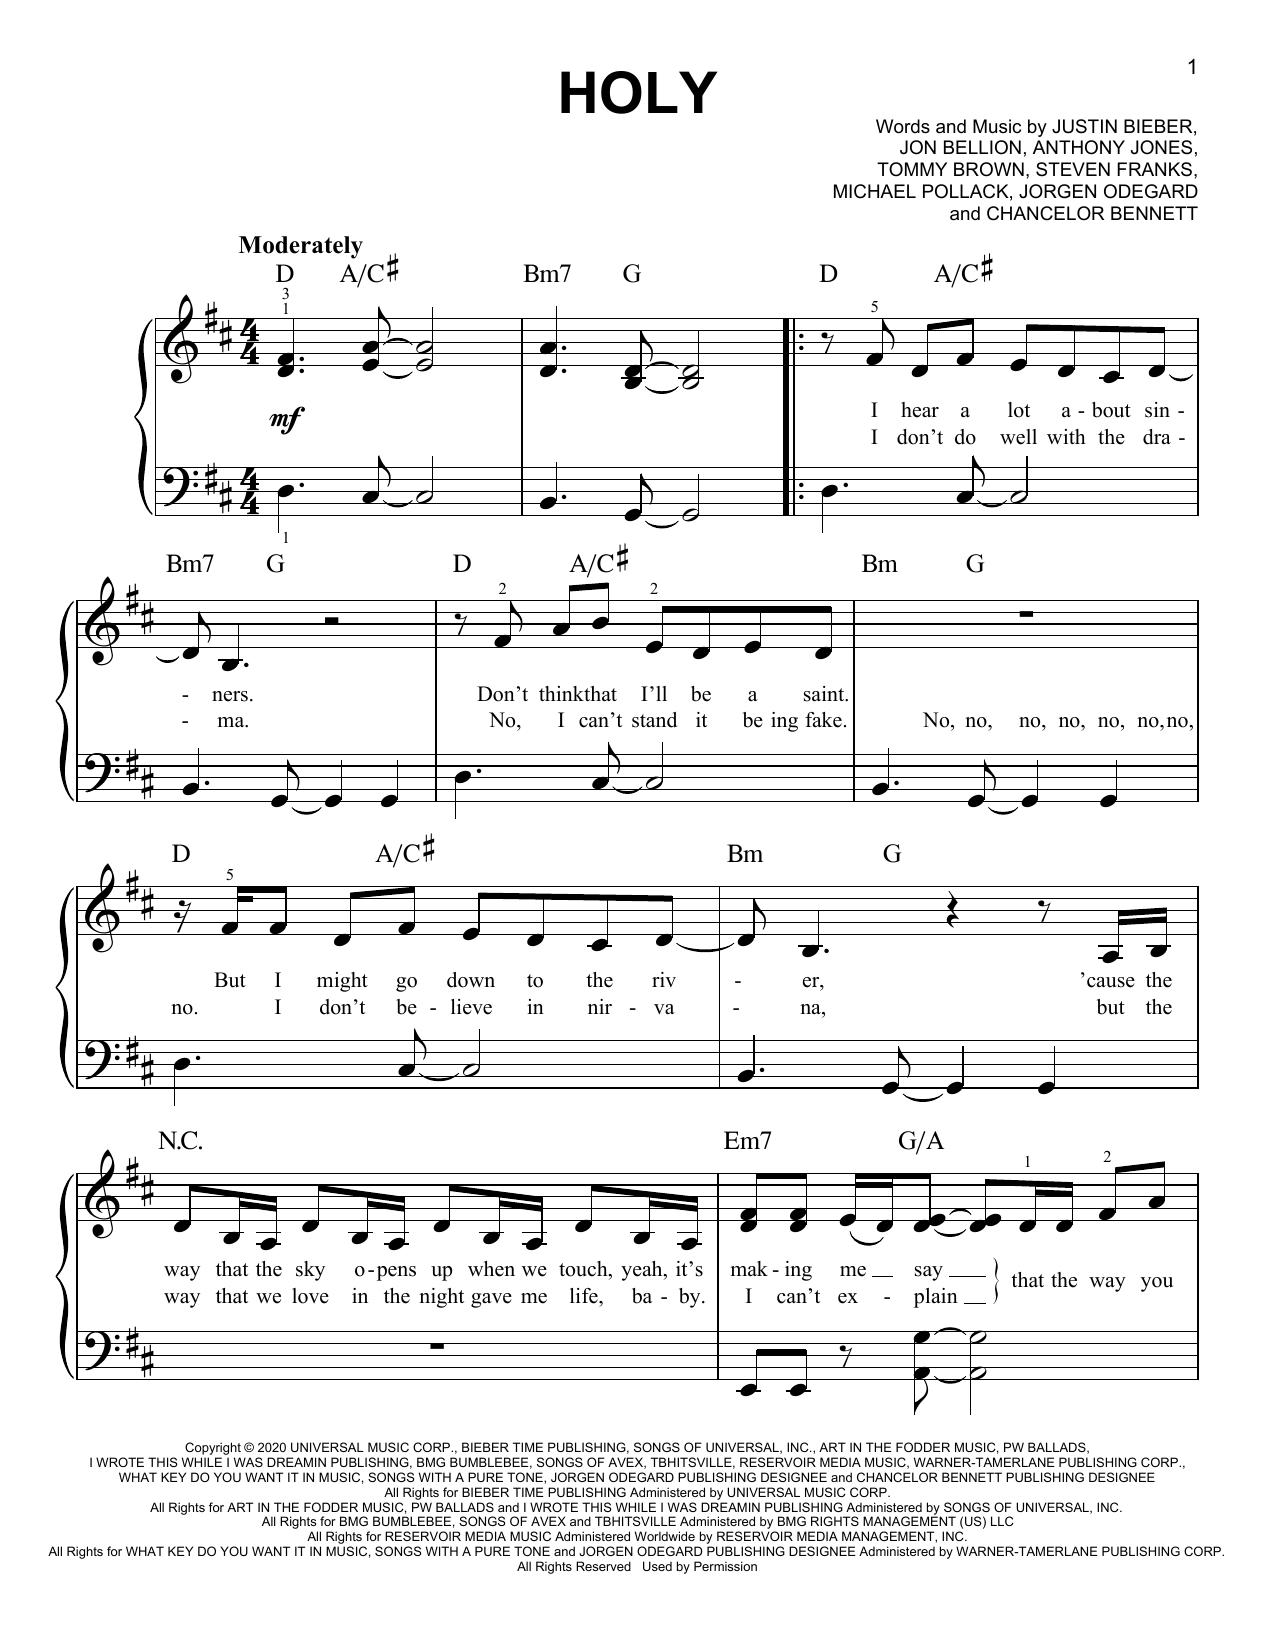 Download Justin Bieber Holy (feat. Chance the Rapper) Sheet Music